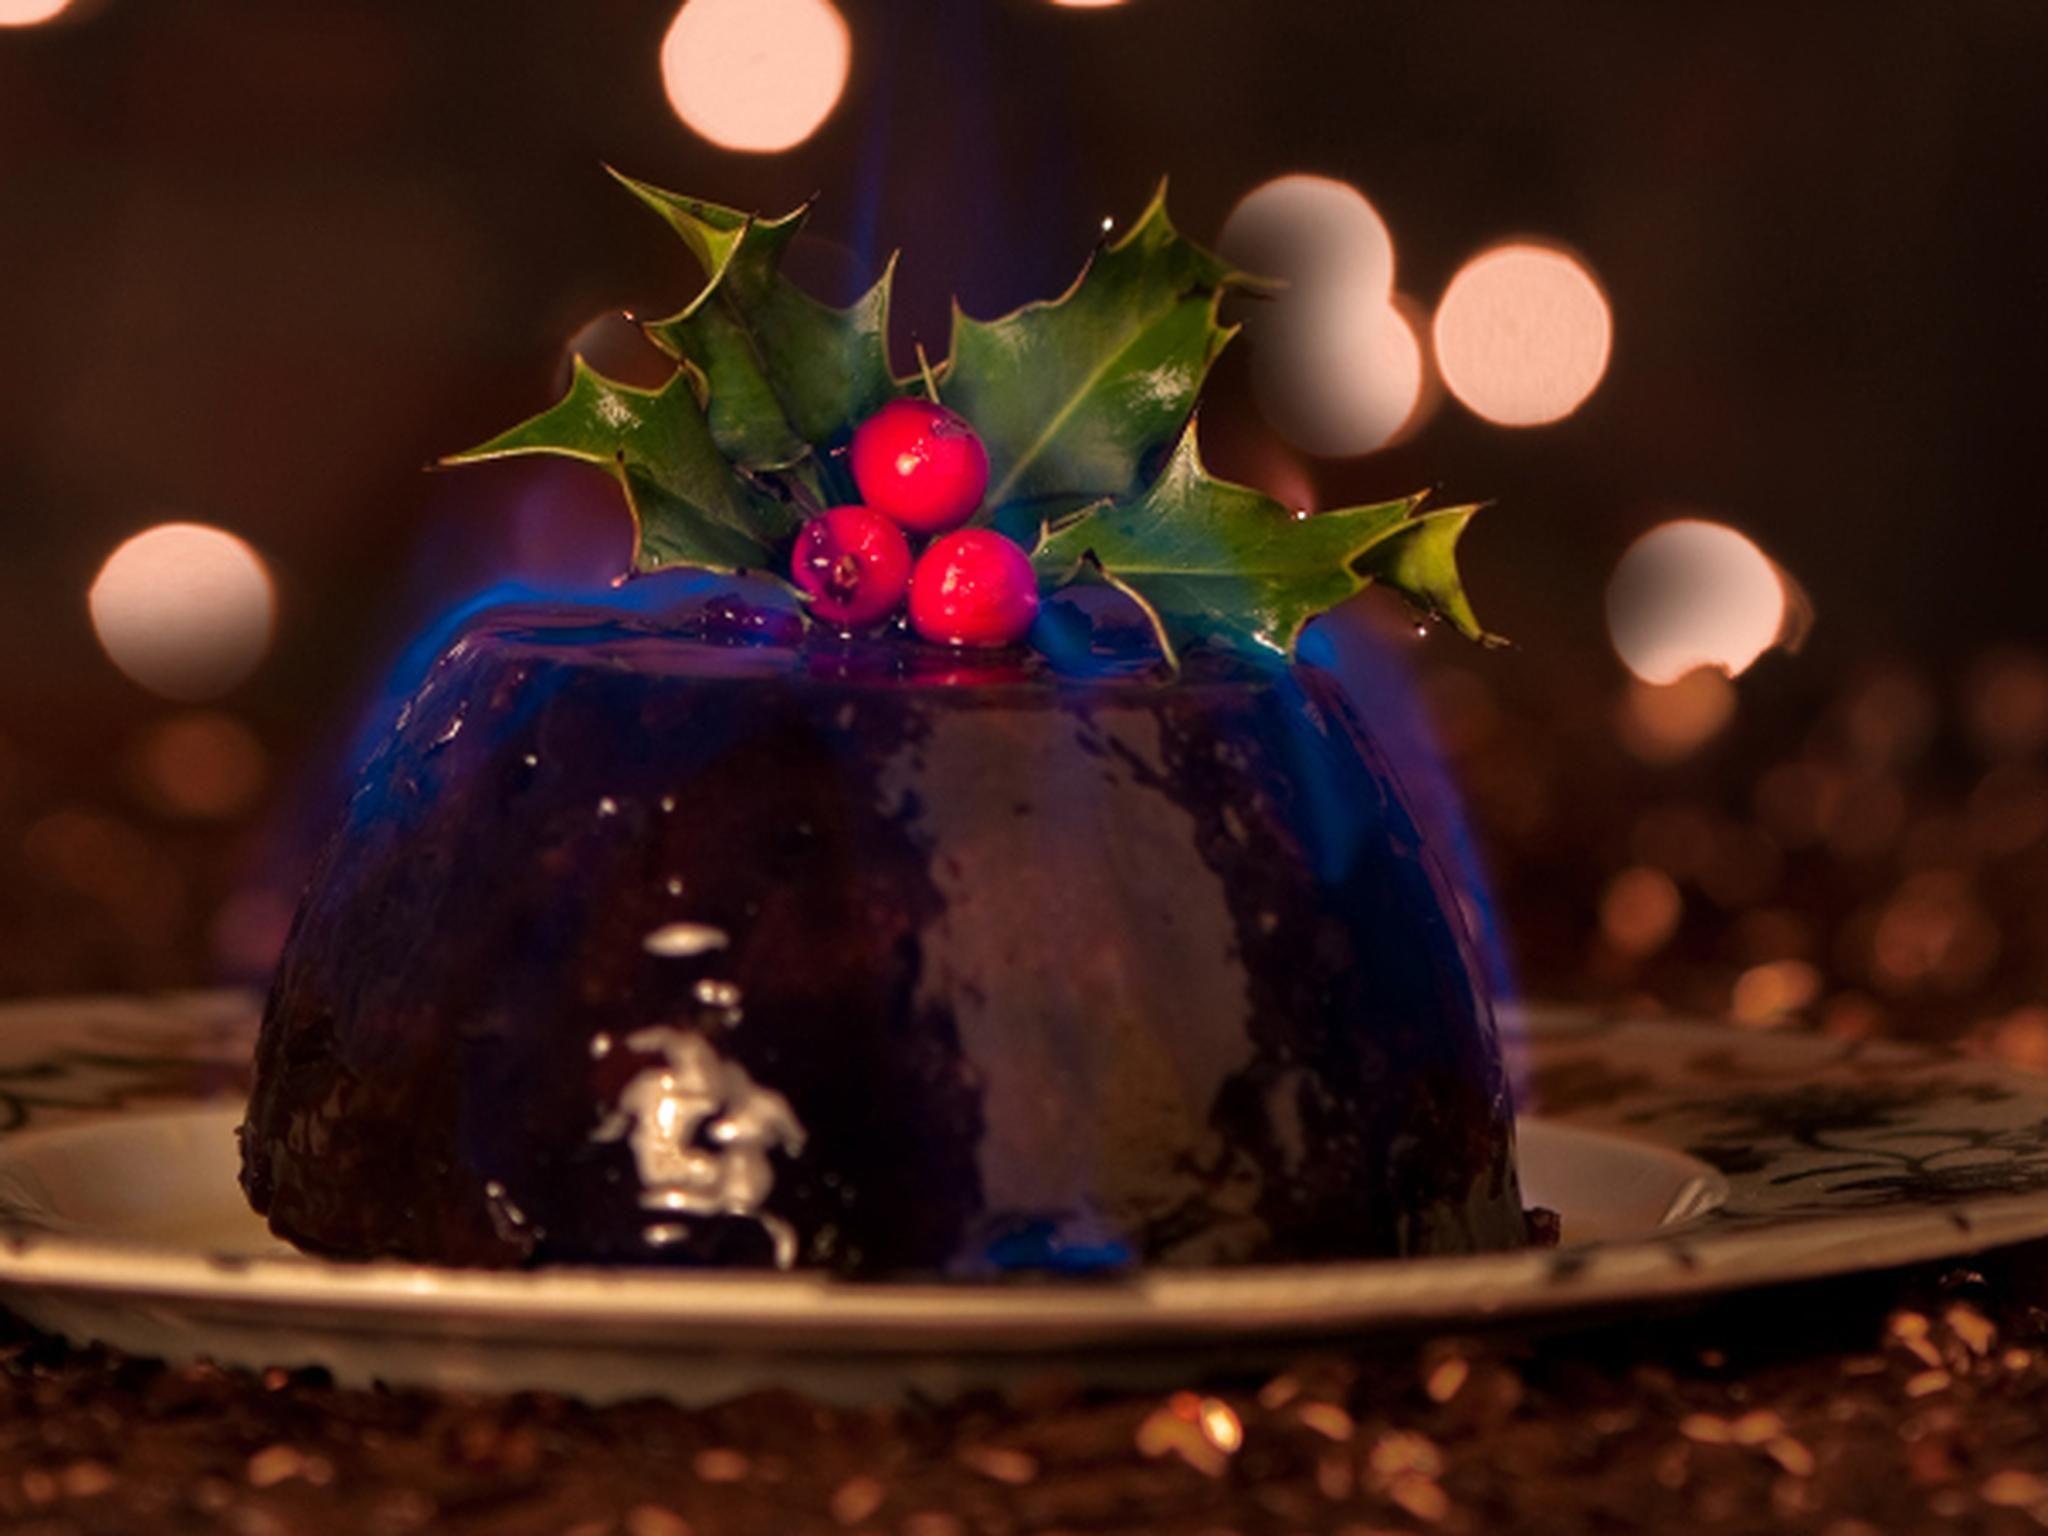 A Christmas Pudding In The Mail Carries A Taste Of Home